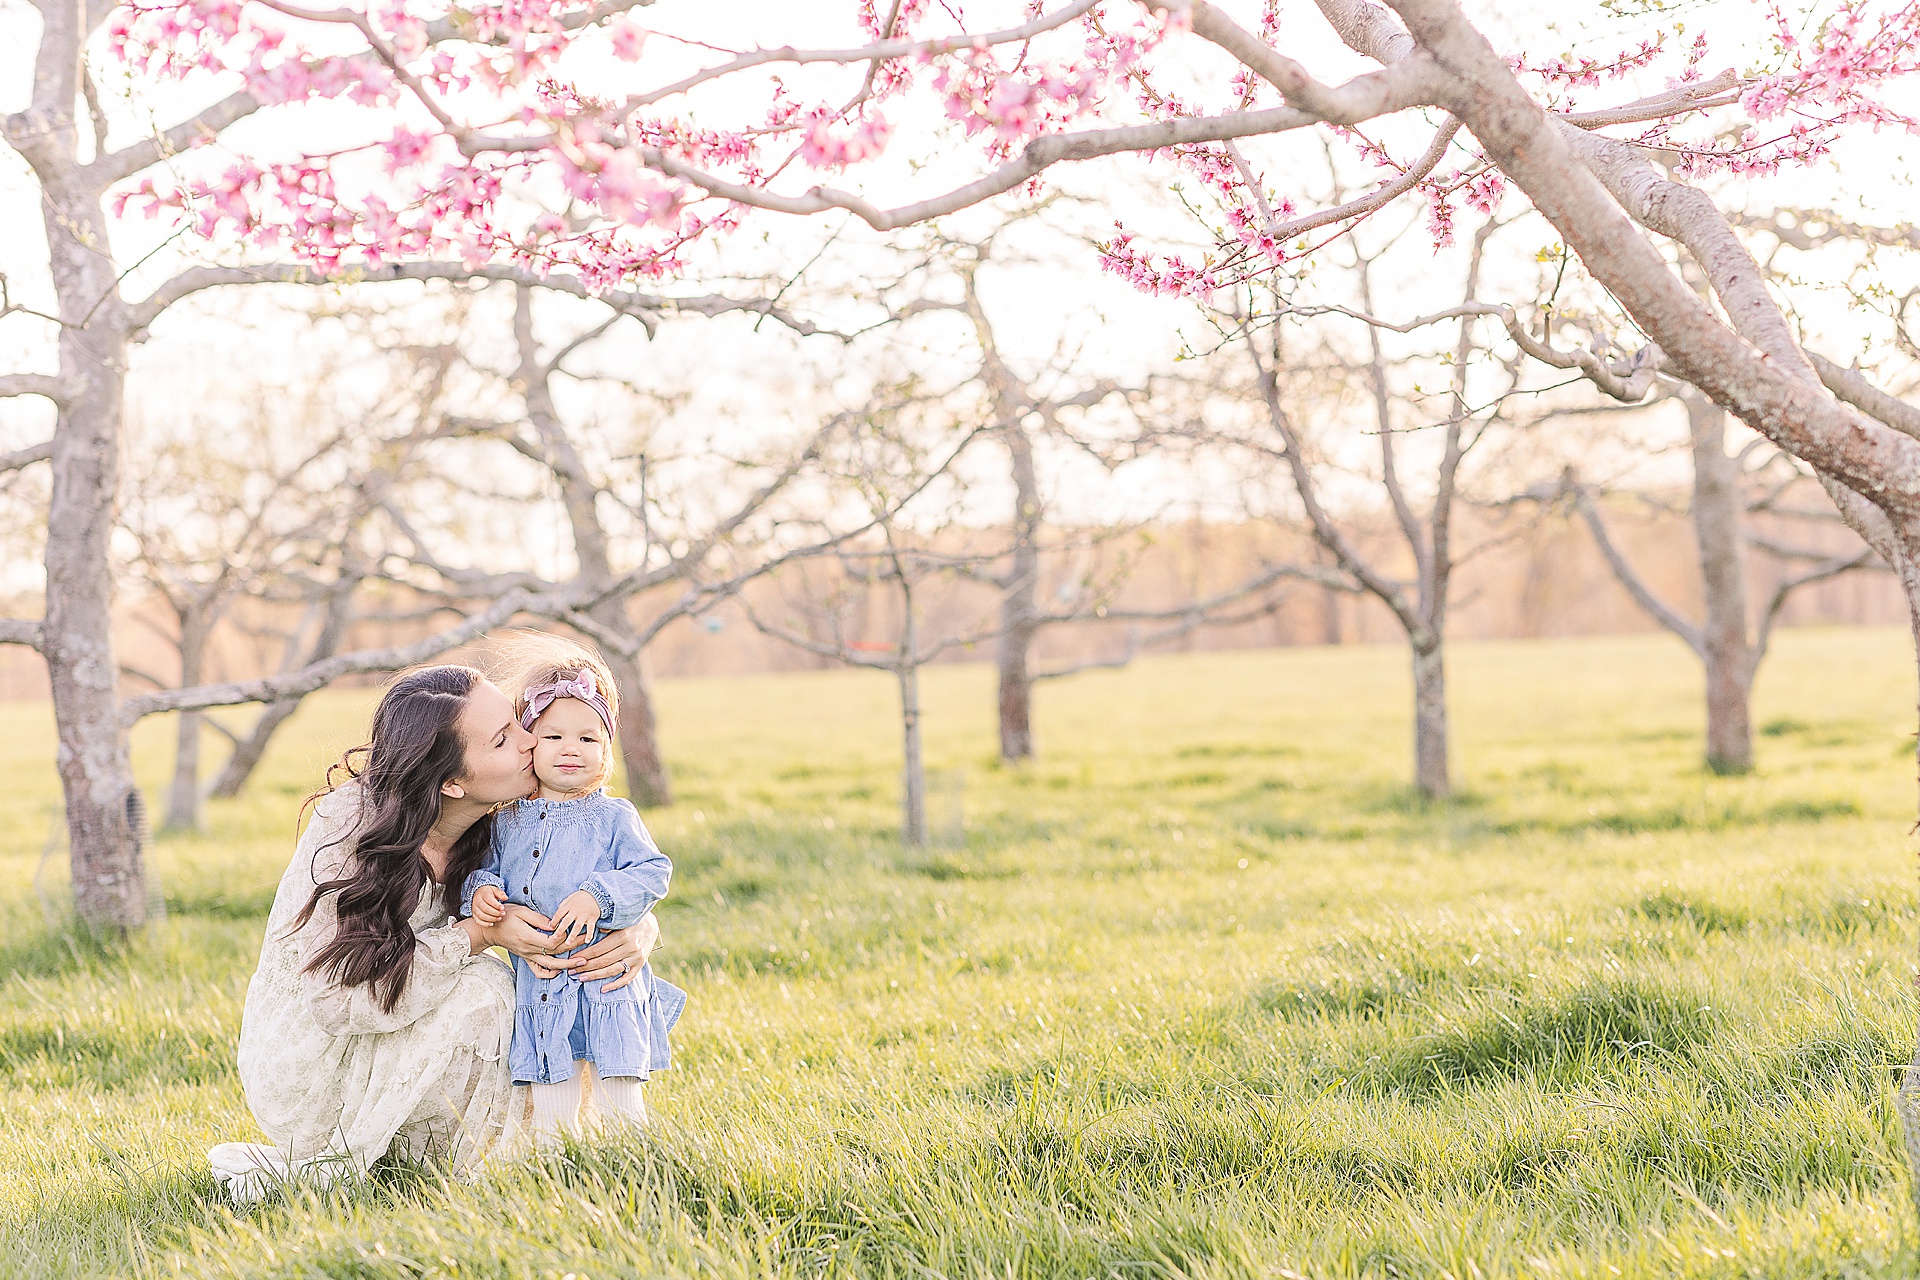 mom kisses daughter on the cheek during apple blossom family photo session at Heard Farm in Wayland Massachusetts with Sara Sniderman Photography